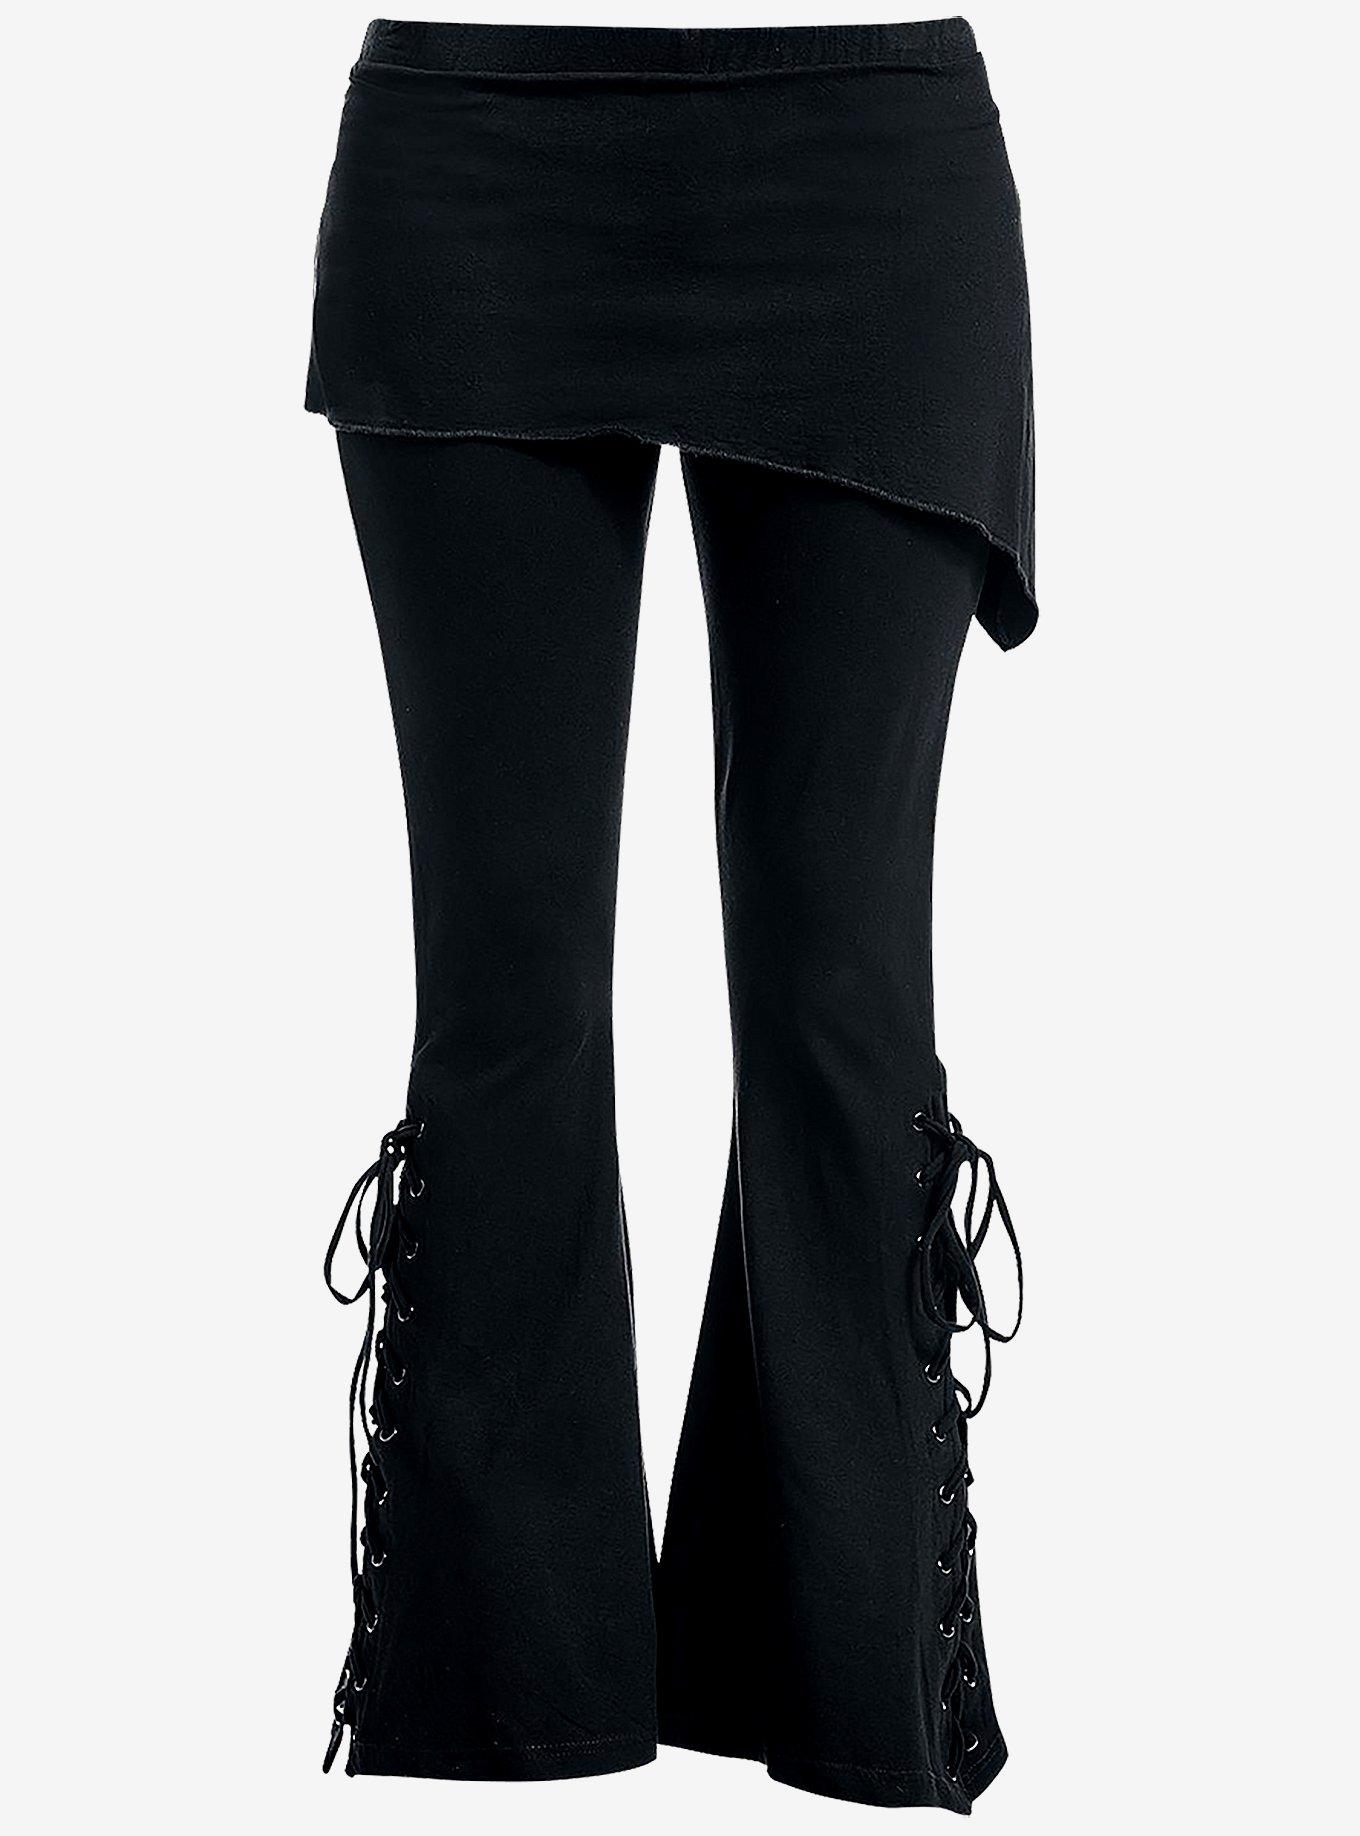 Lace Up Flare Leggings Hot Topic